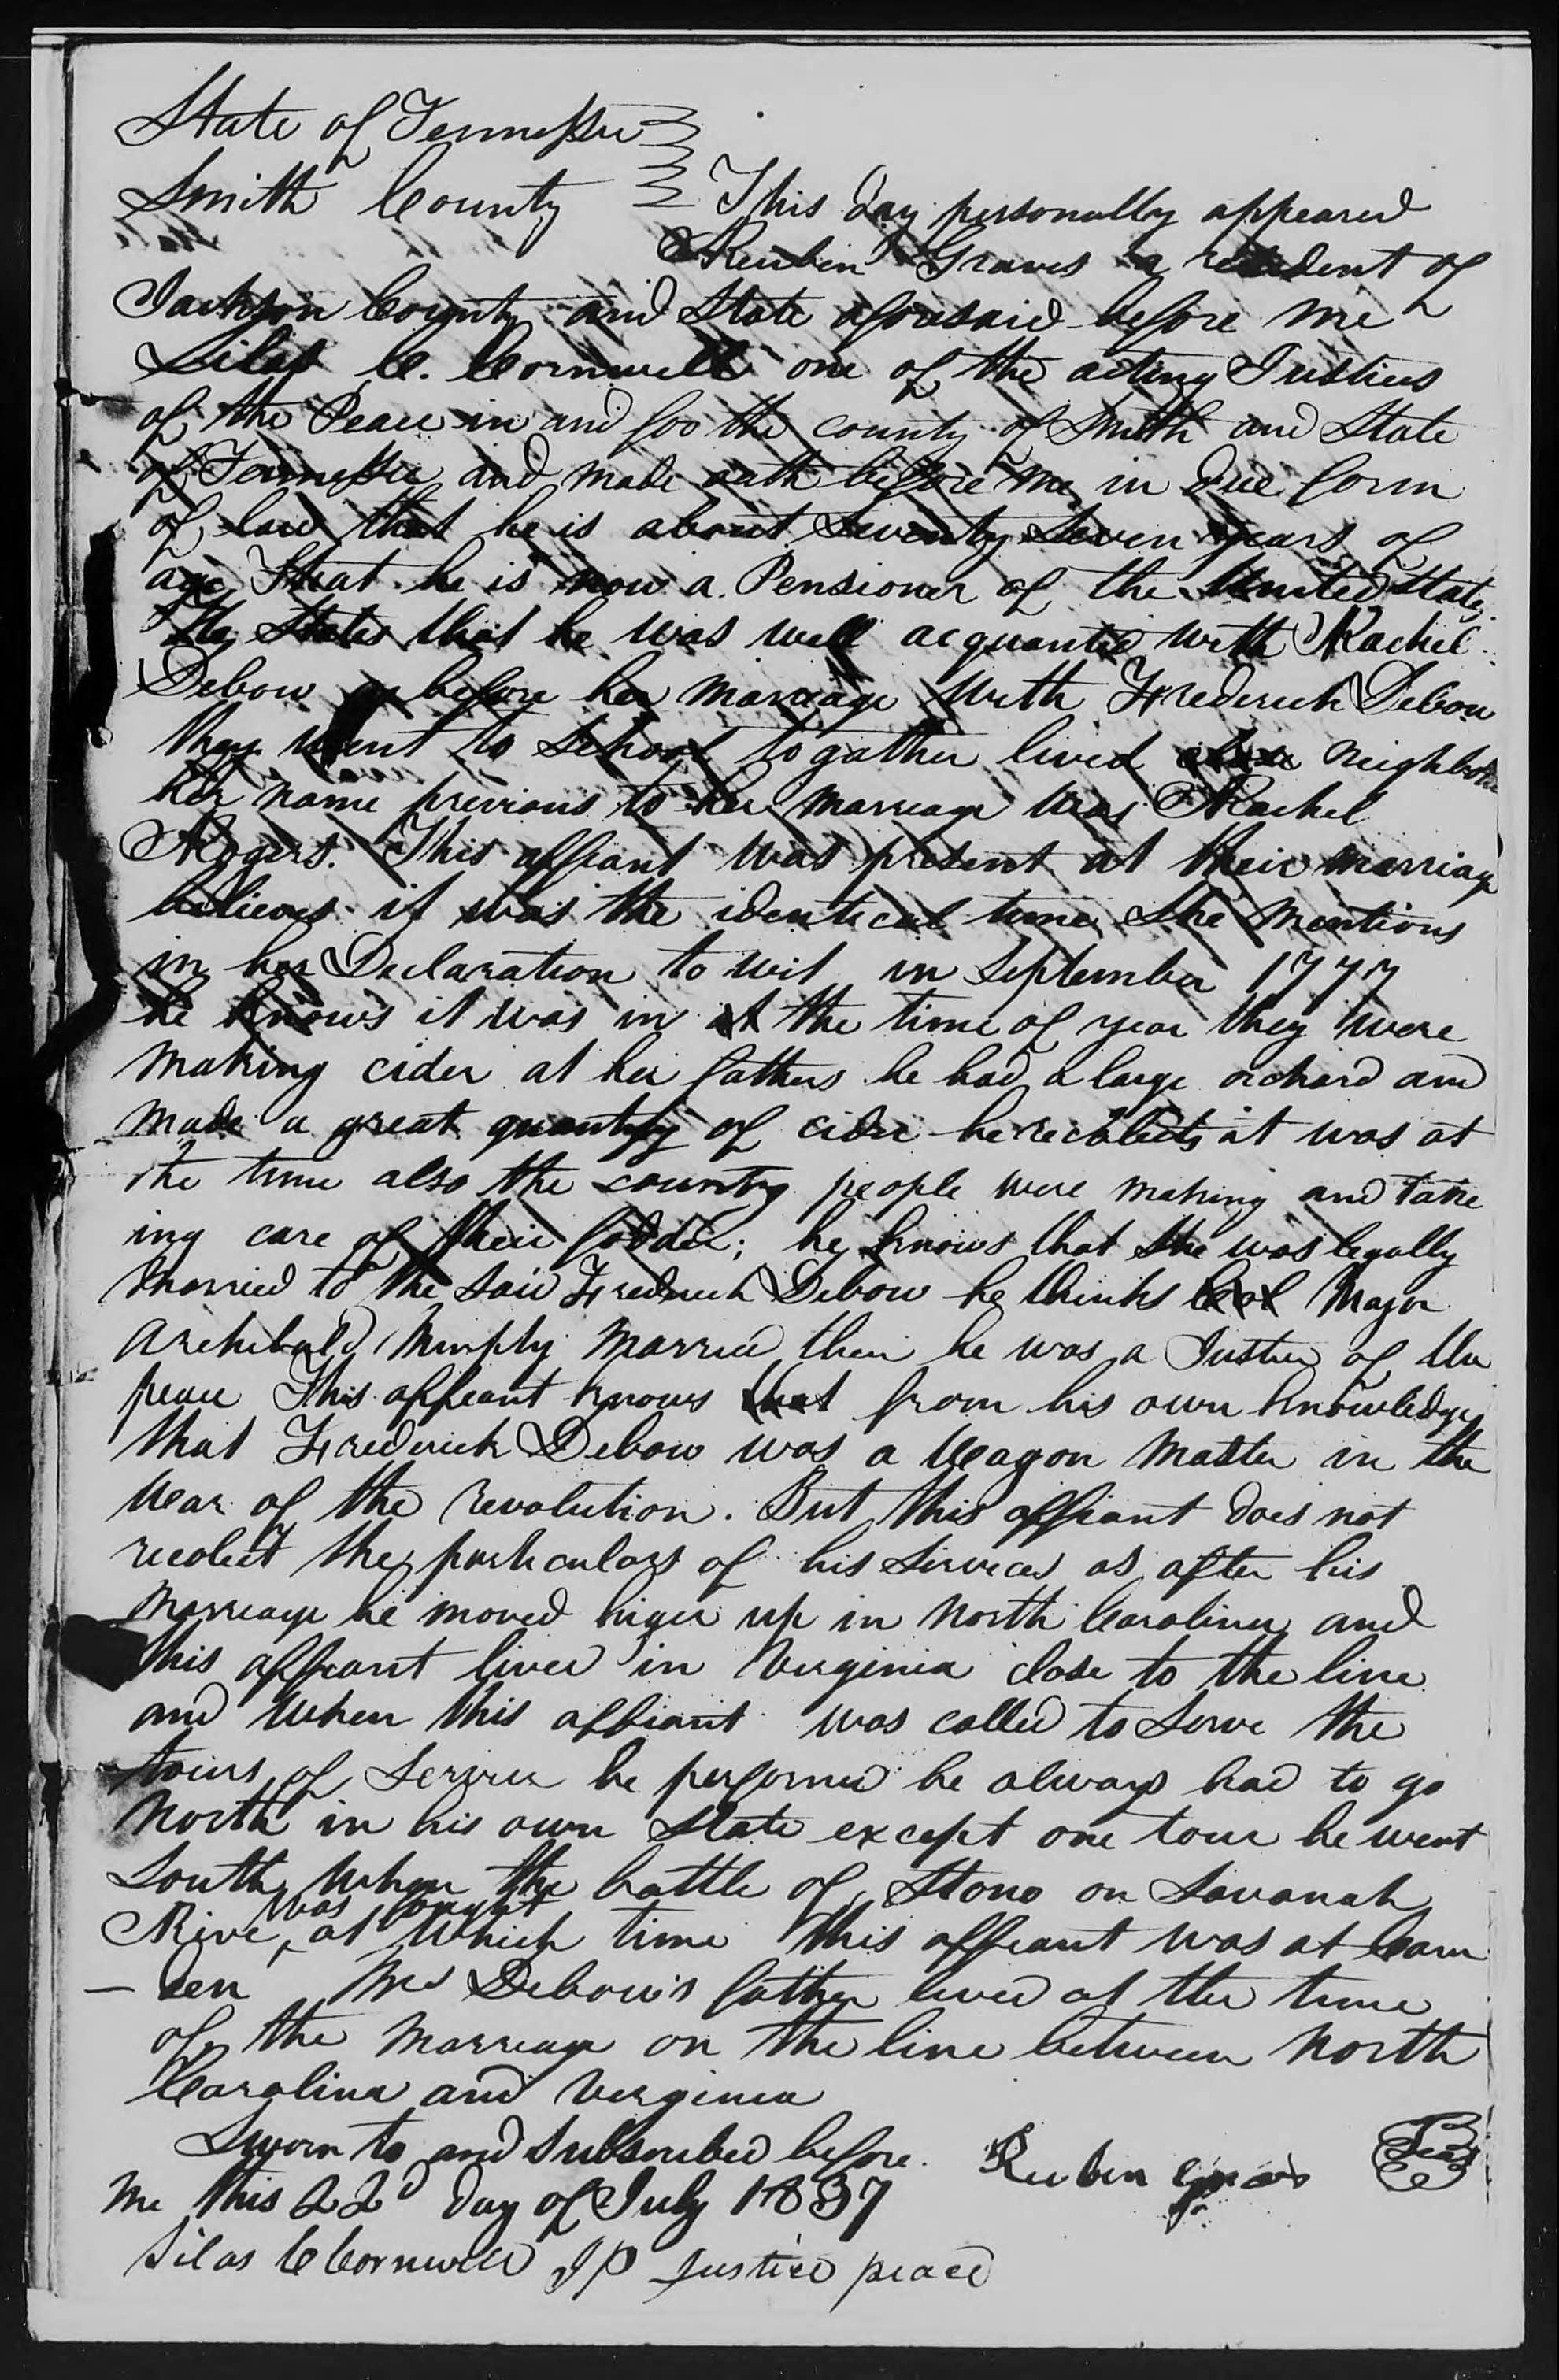 Affidavit of Reuben Graves in support of a Pension Claim for Rachel Debow, 22 July 1837, page 1